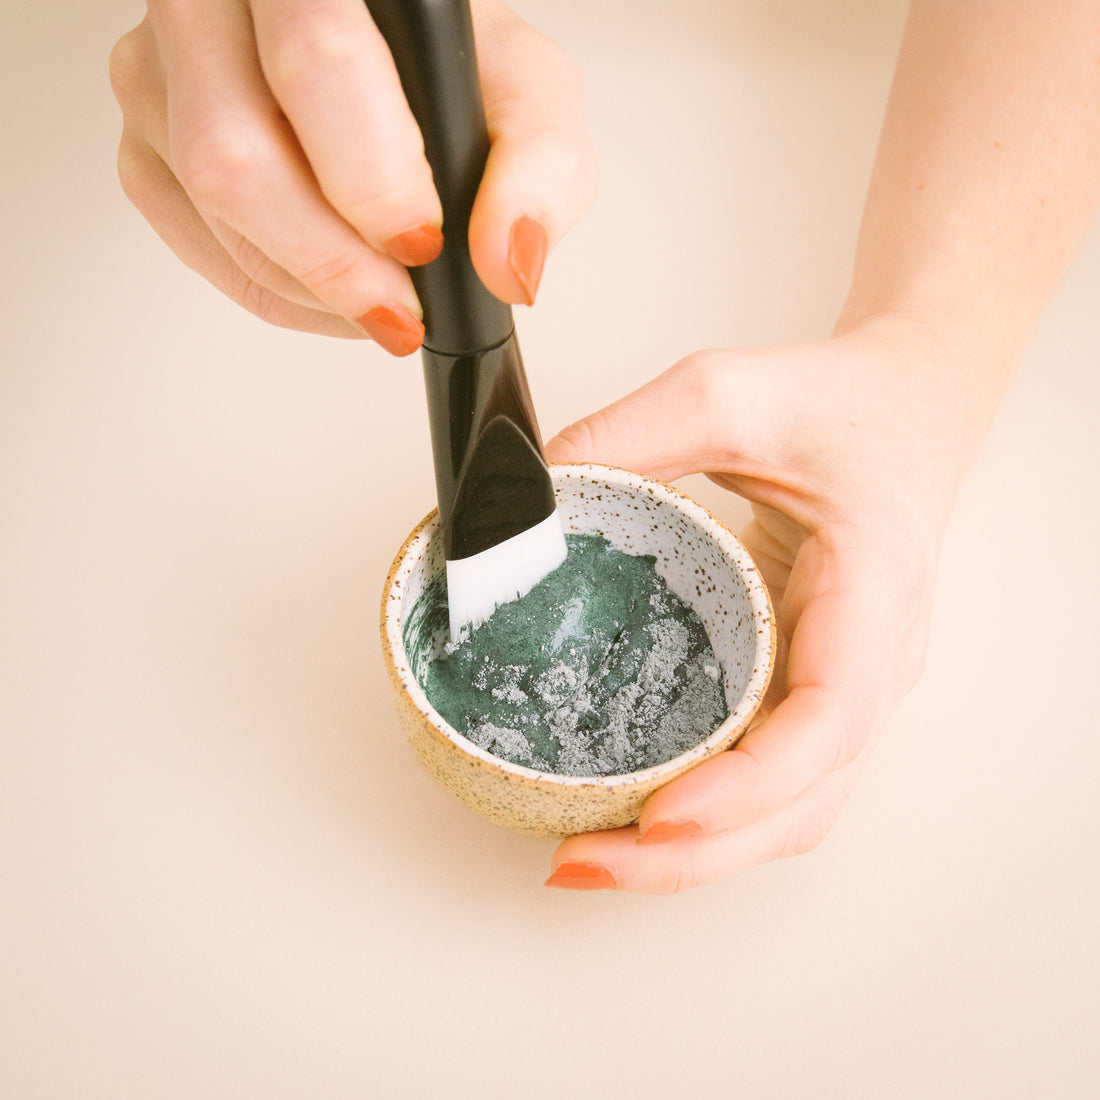 Superfood Powder-to-Mousse Purifying Clay Mask